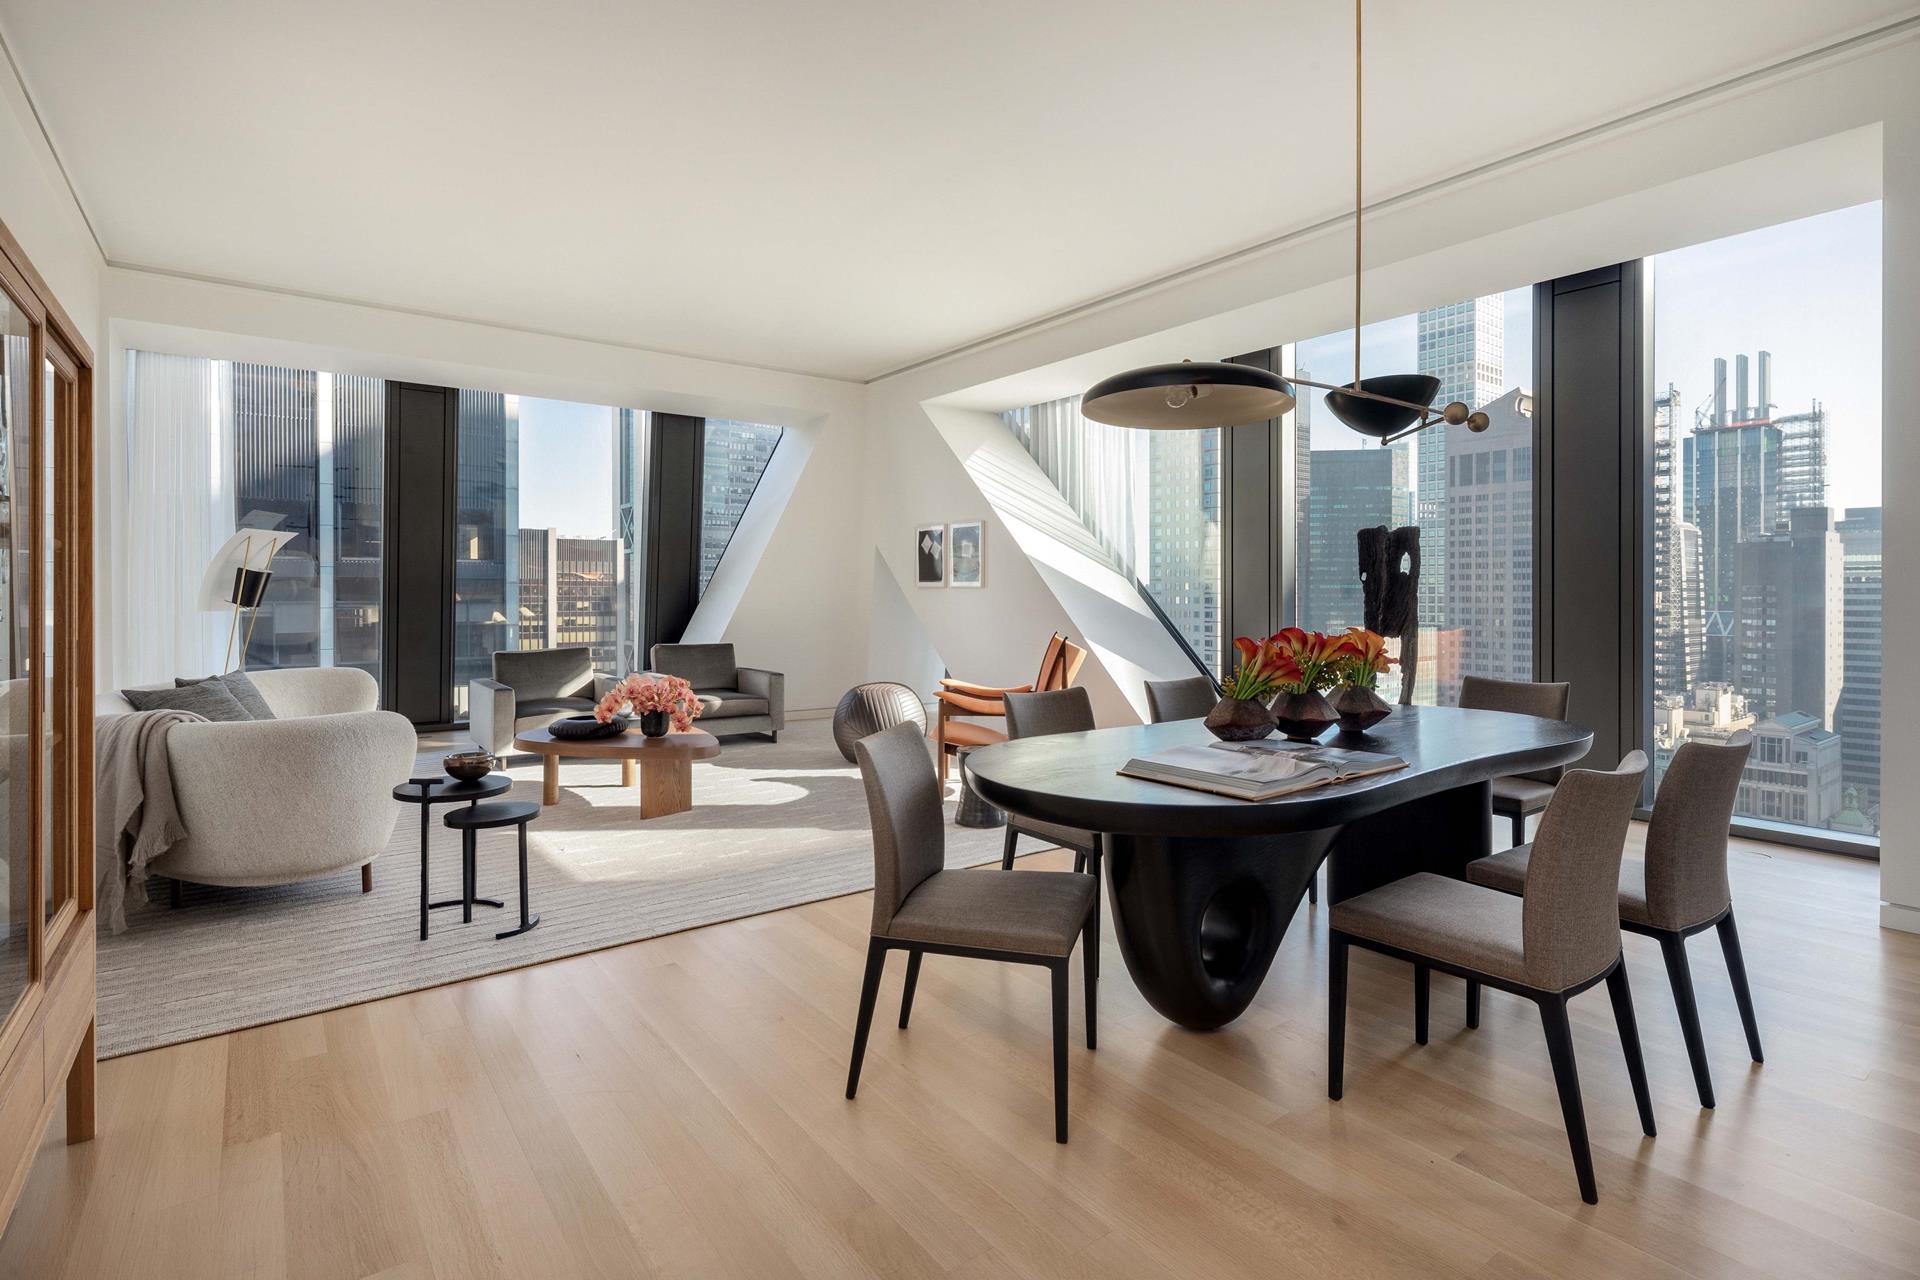 53 West 53rd Street 31A, Chelsea And Clinton, Downtown, NYC - 3 Bedrooms  
3 Bathrooms  
5 Rooms - 